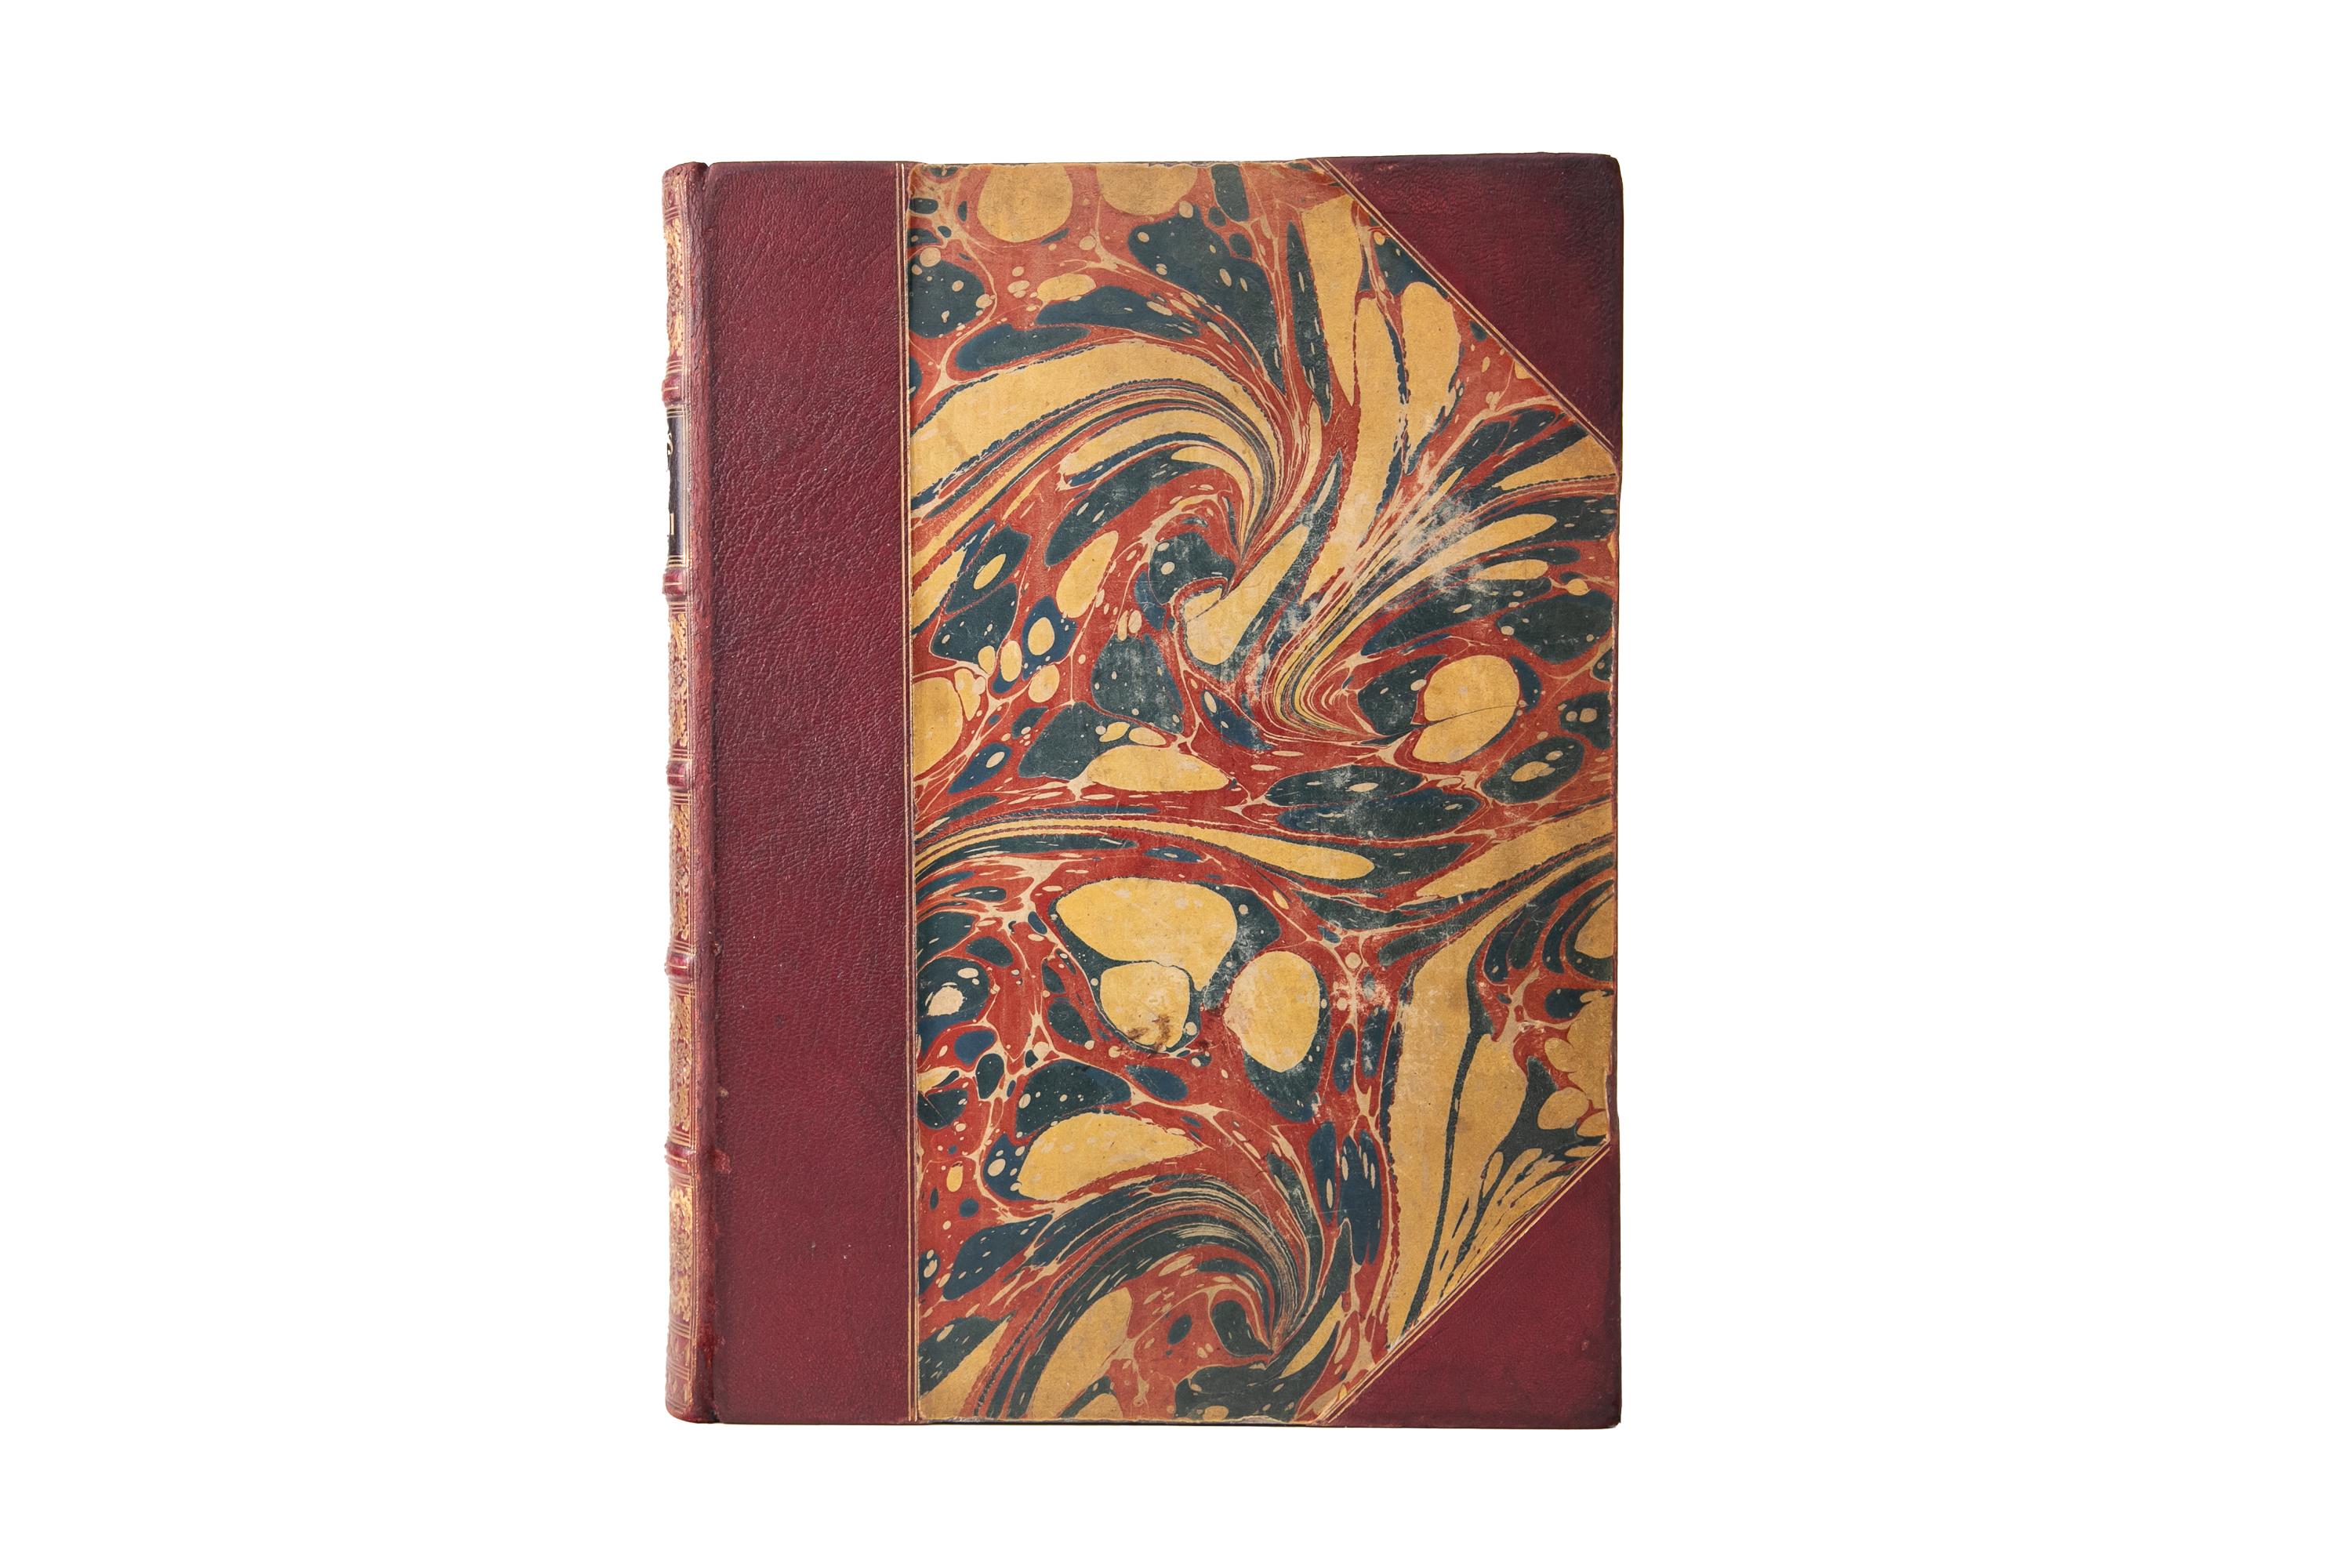 1 Volume. Edmund Lodge, Portraits of Illustrious Personages. Bound in 3/4 wine morocco and marbled boards, bordered in gilt-tooling. Raised band spine with gilt-tooled details and a black morocco label. All of the edges are gilded with marbled